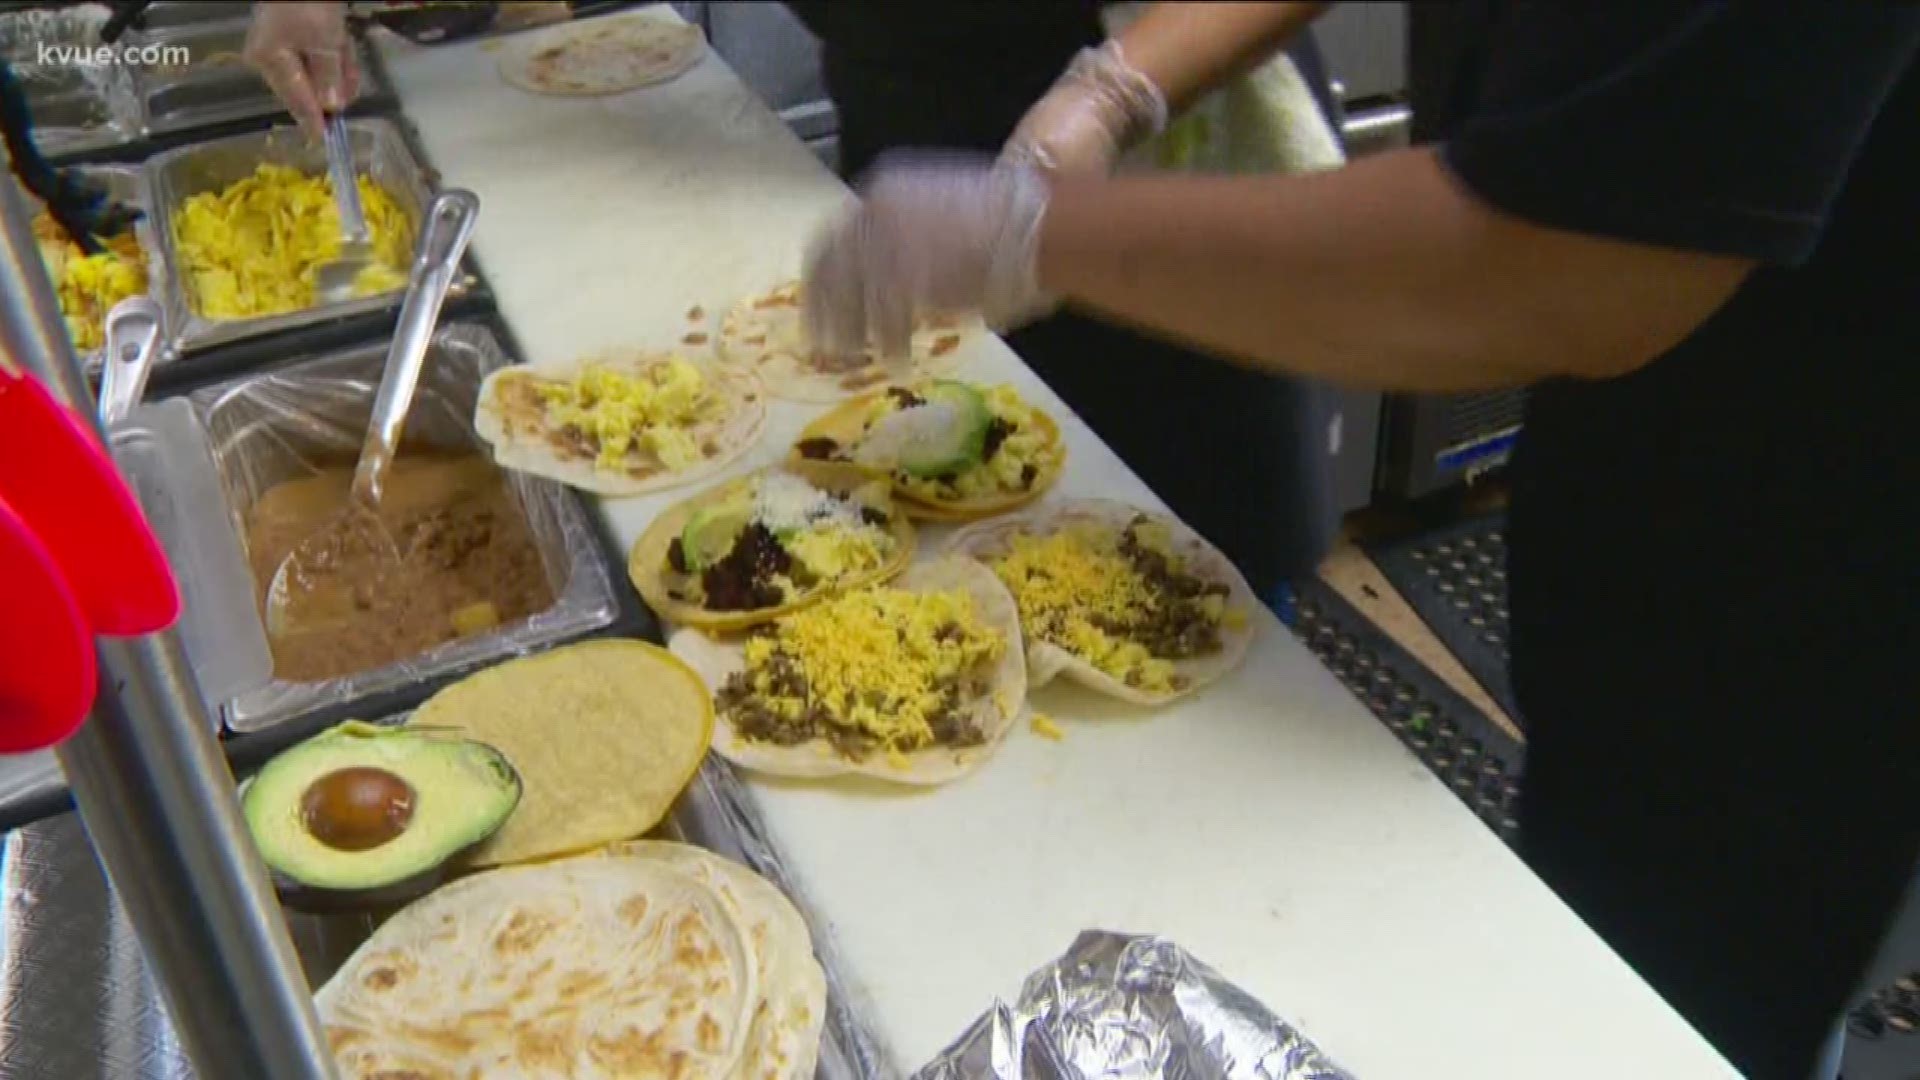 KVUE is highlighting a taco joint that is sure to become your next 'go-to' spot.

Lucky for us, Tyson's Tacos in North Austin is open 24/7 so you can have both a filling brunch and a tasty snack after a night out.